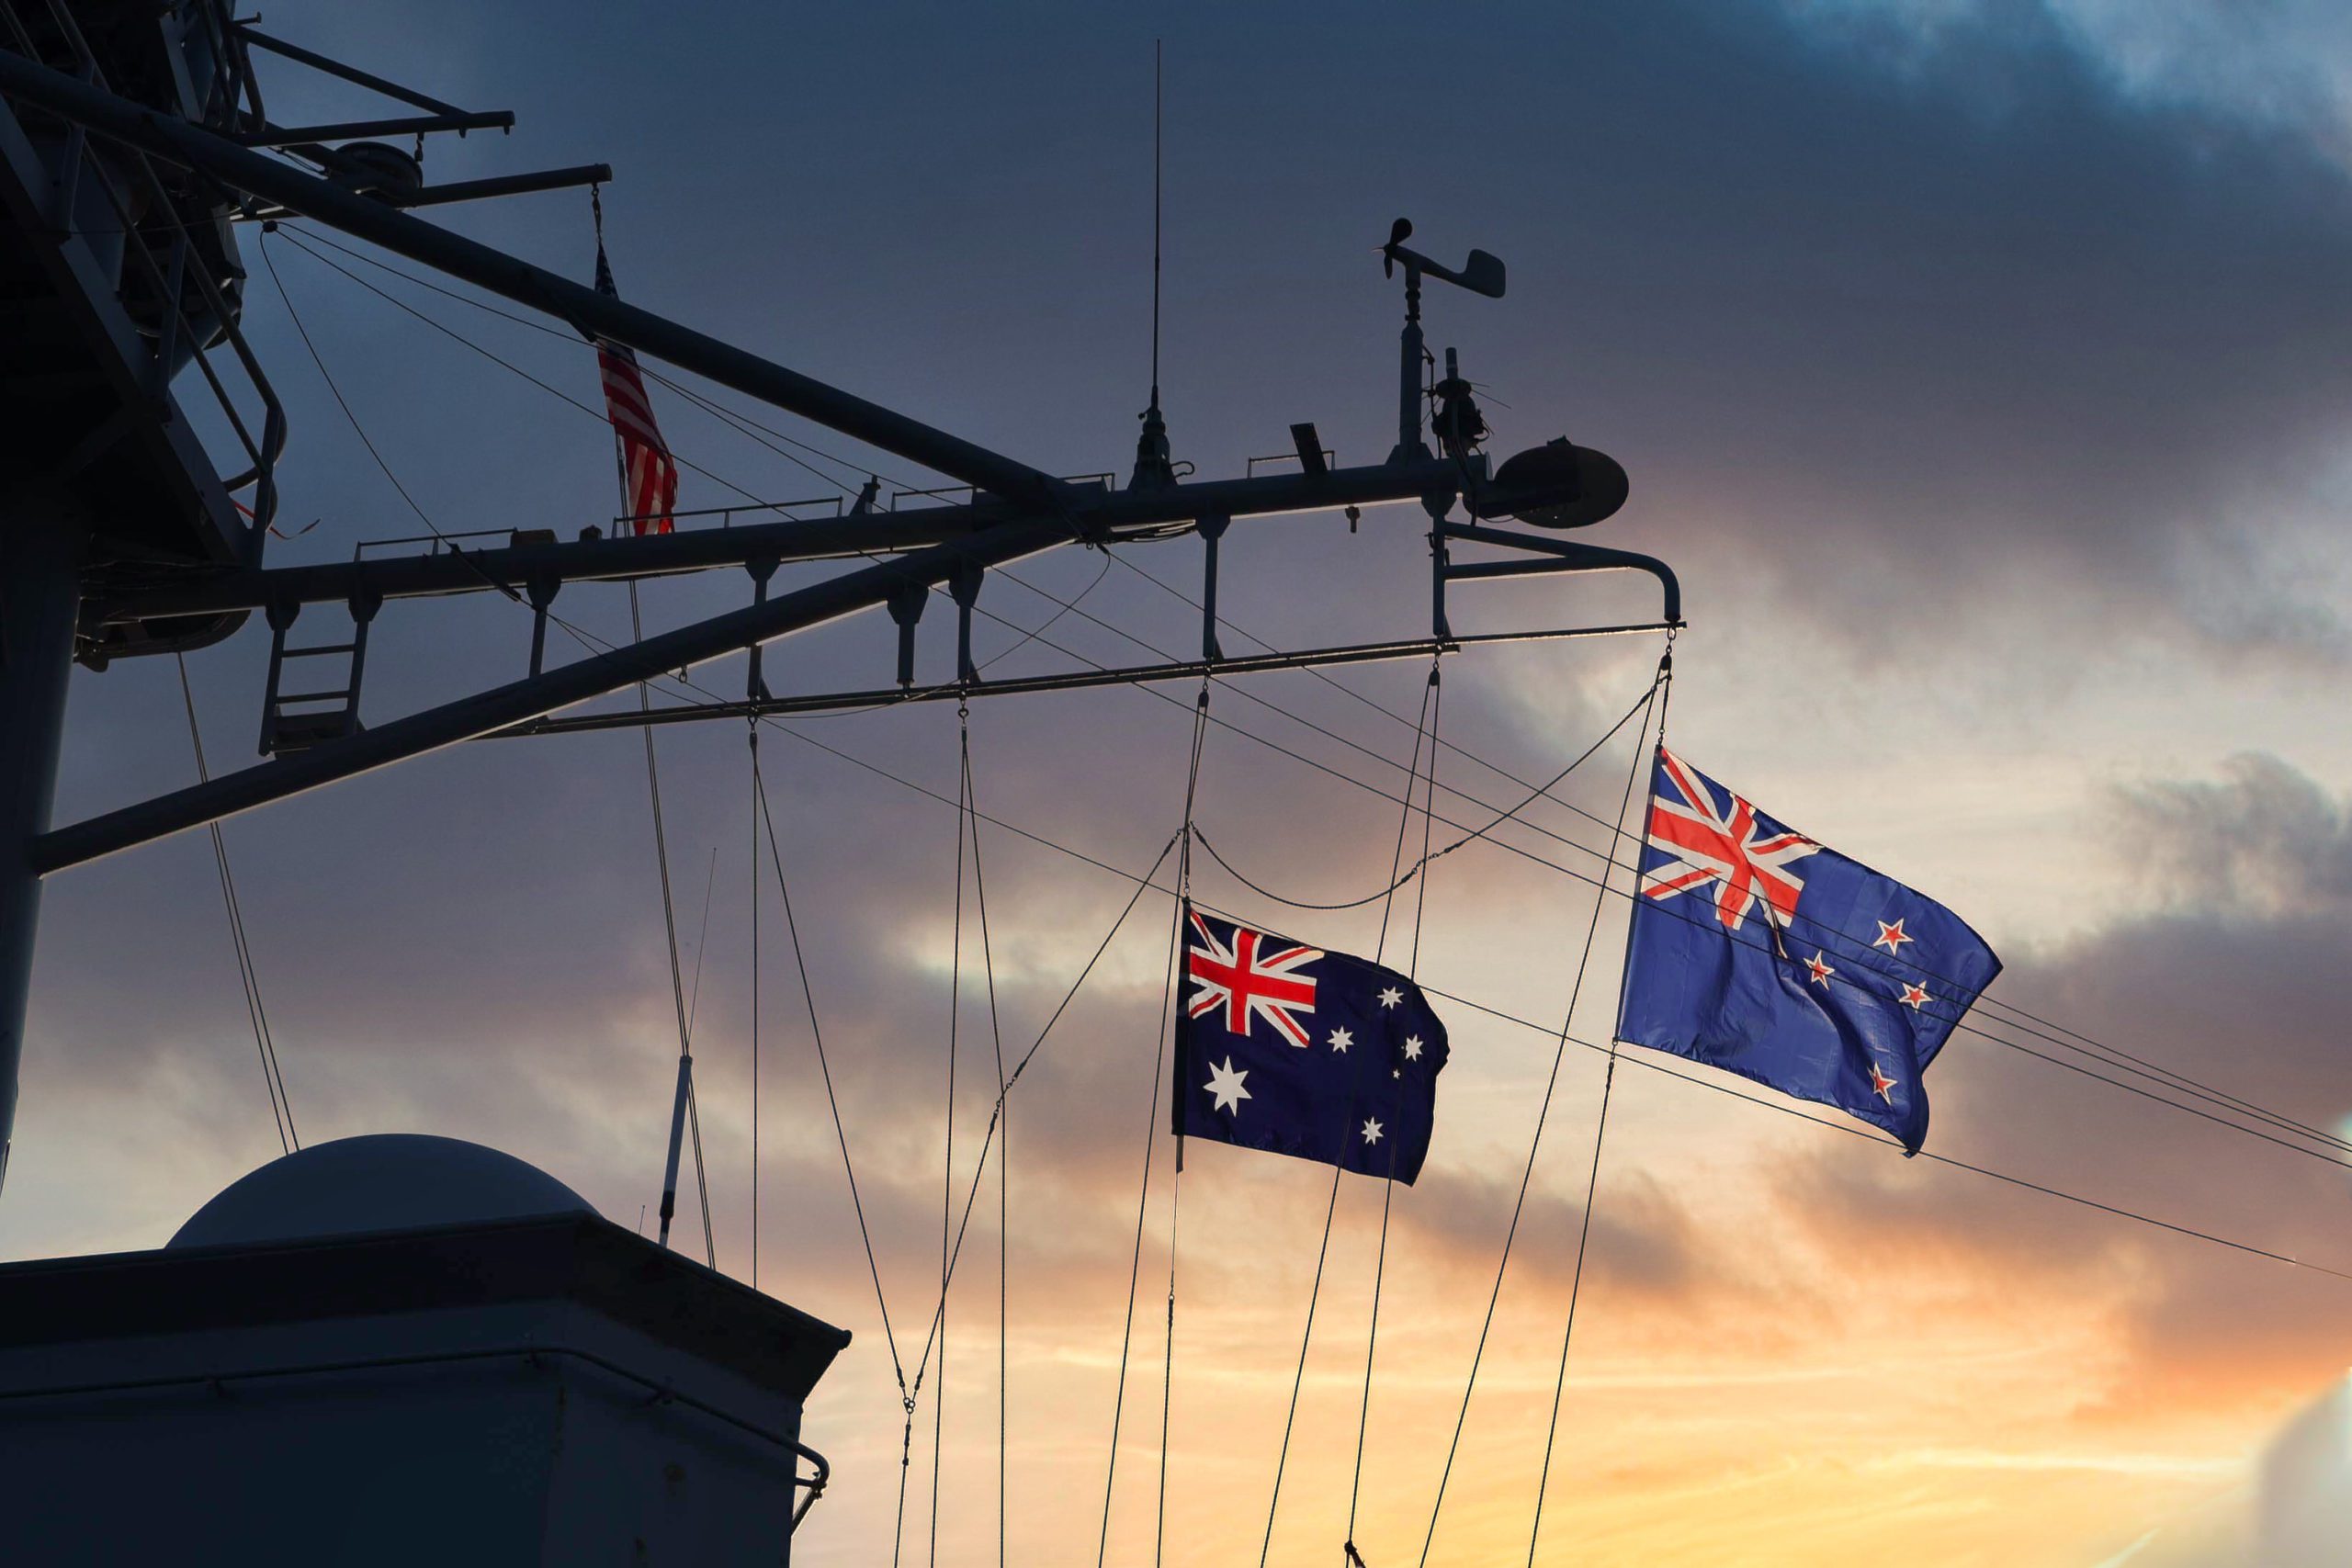 Flags from Australia and New Zealand